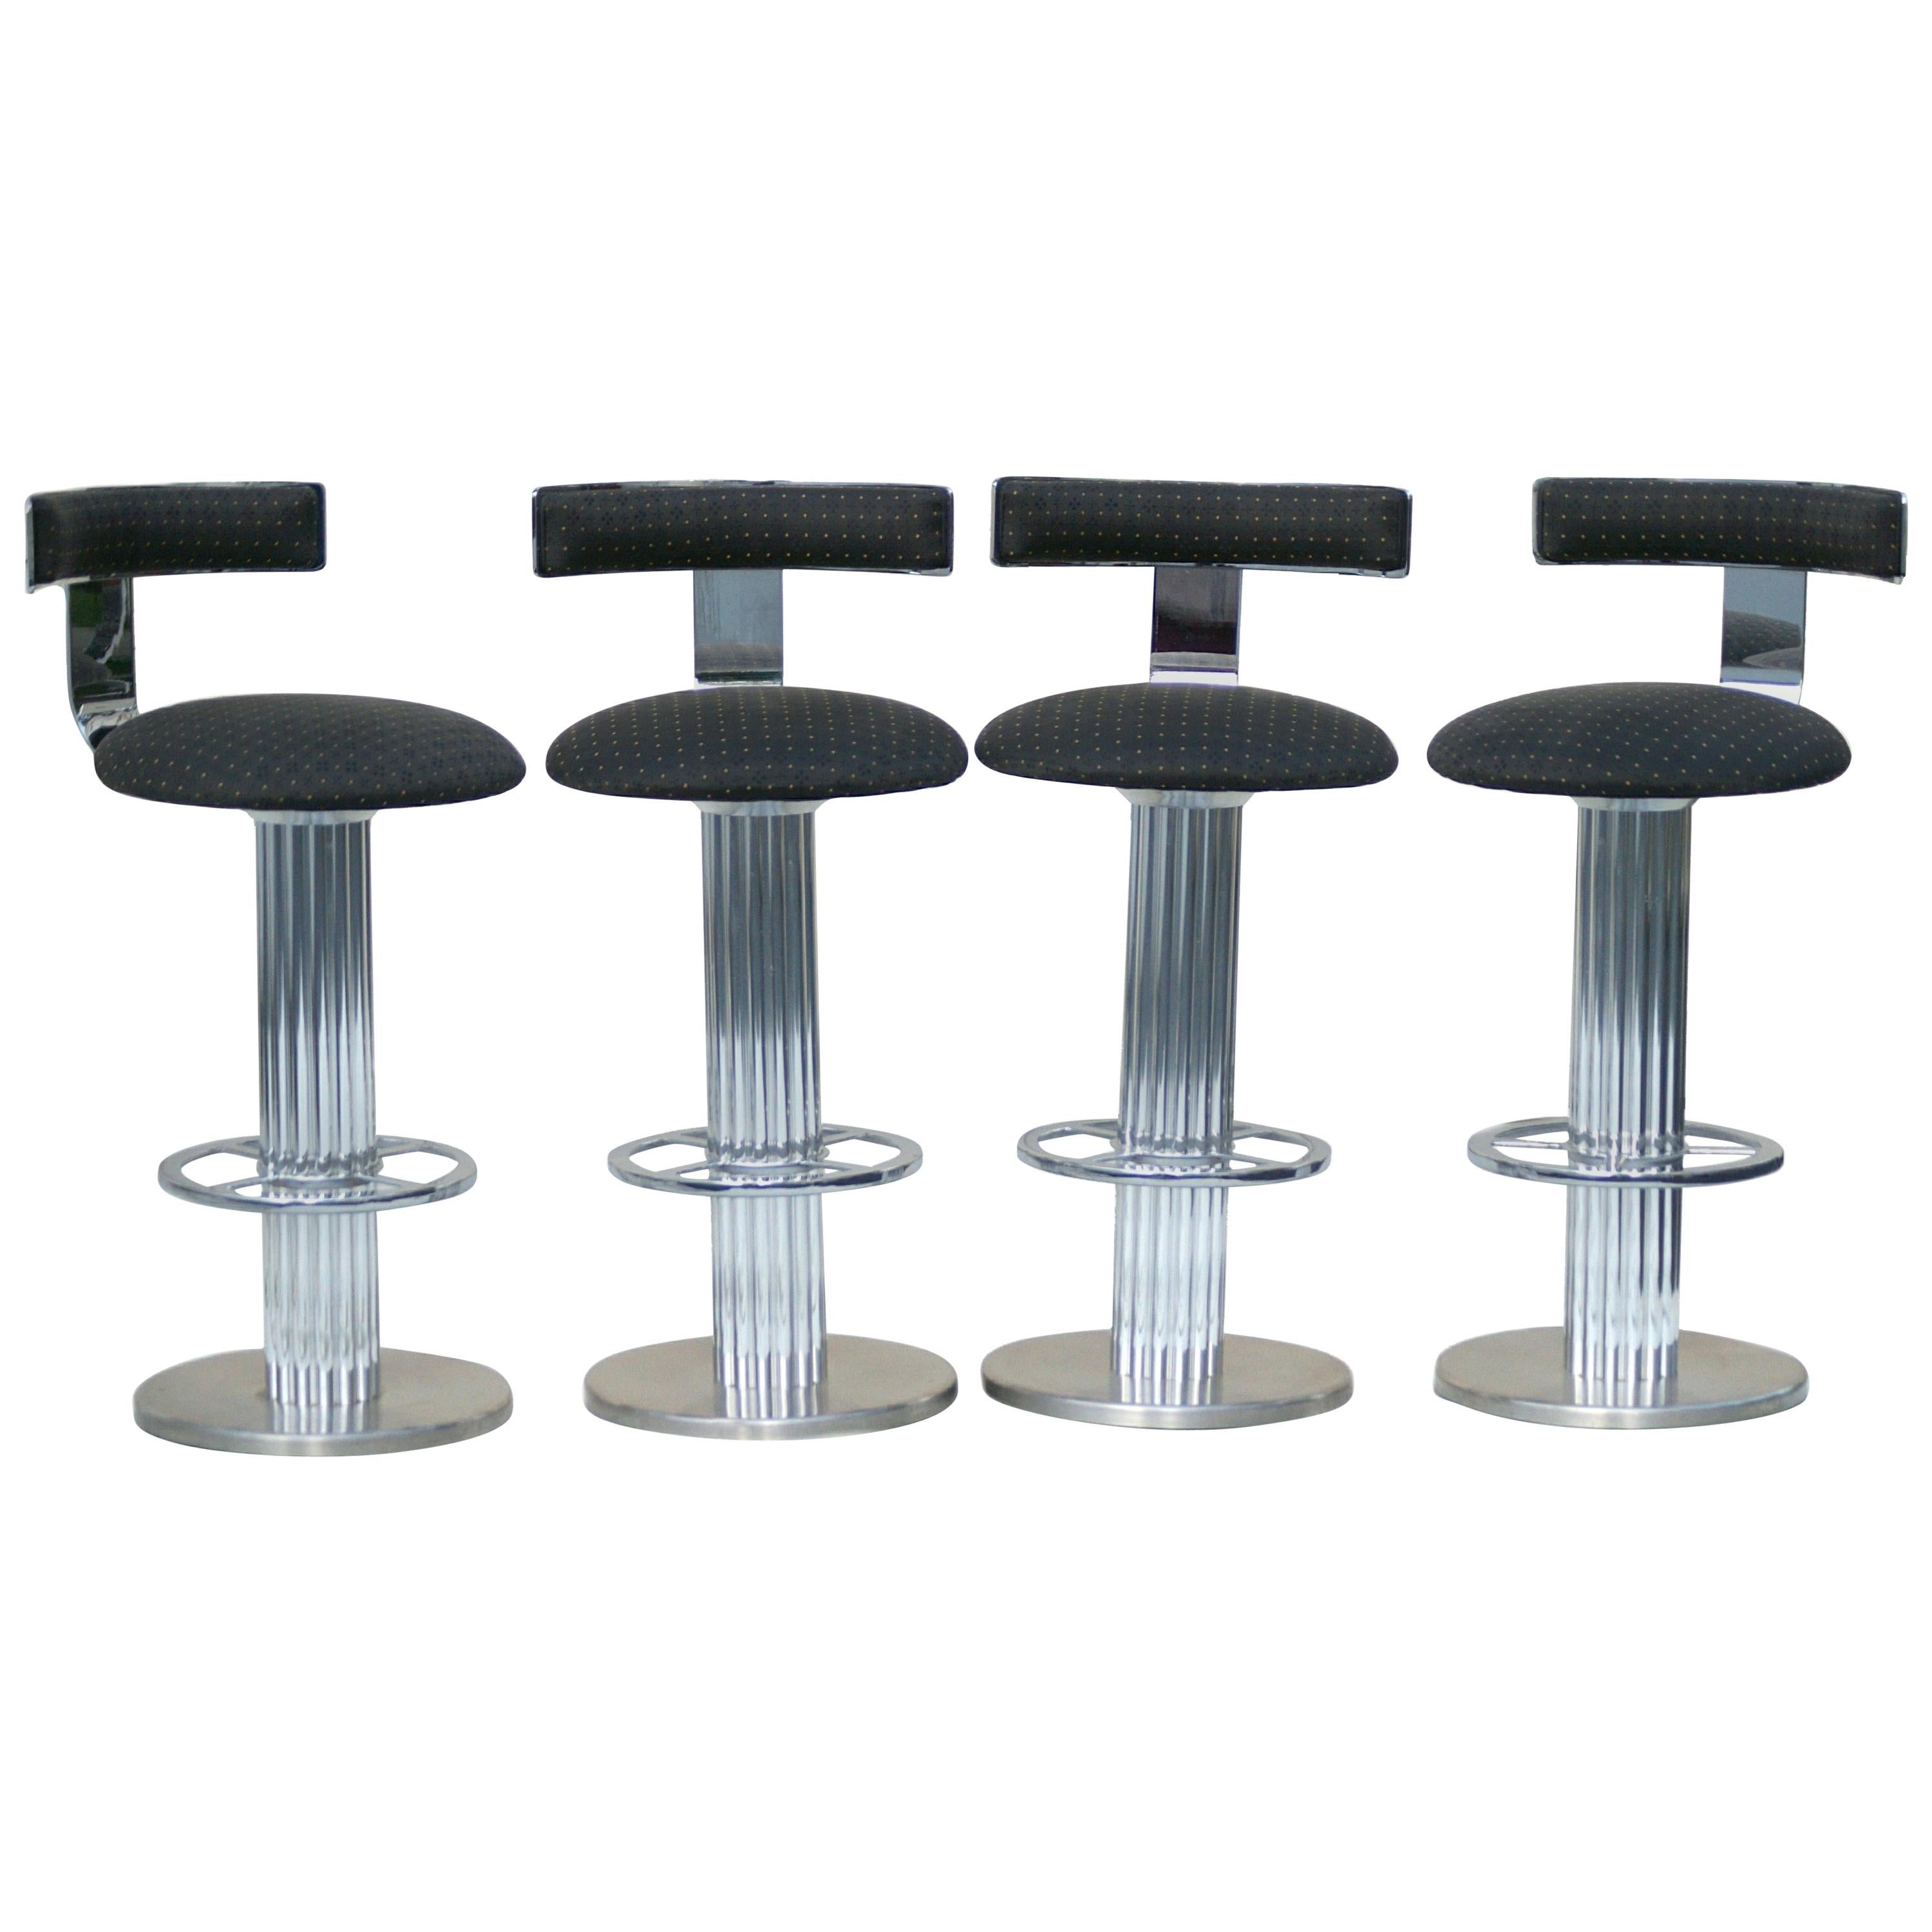 4 Design Designs For Leisure Chrome Steel Bar Counter Stools